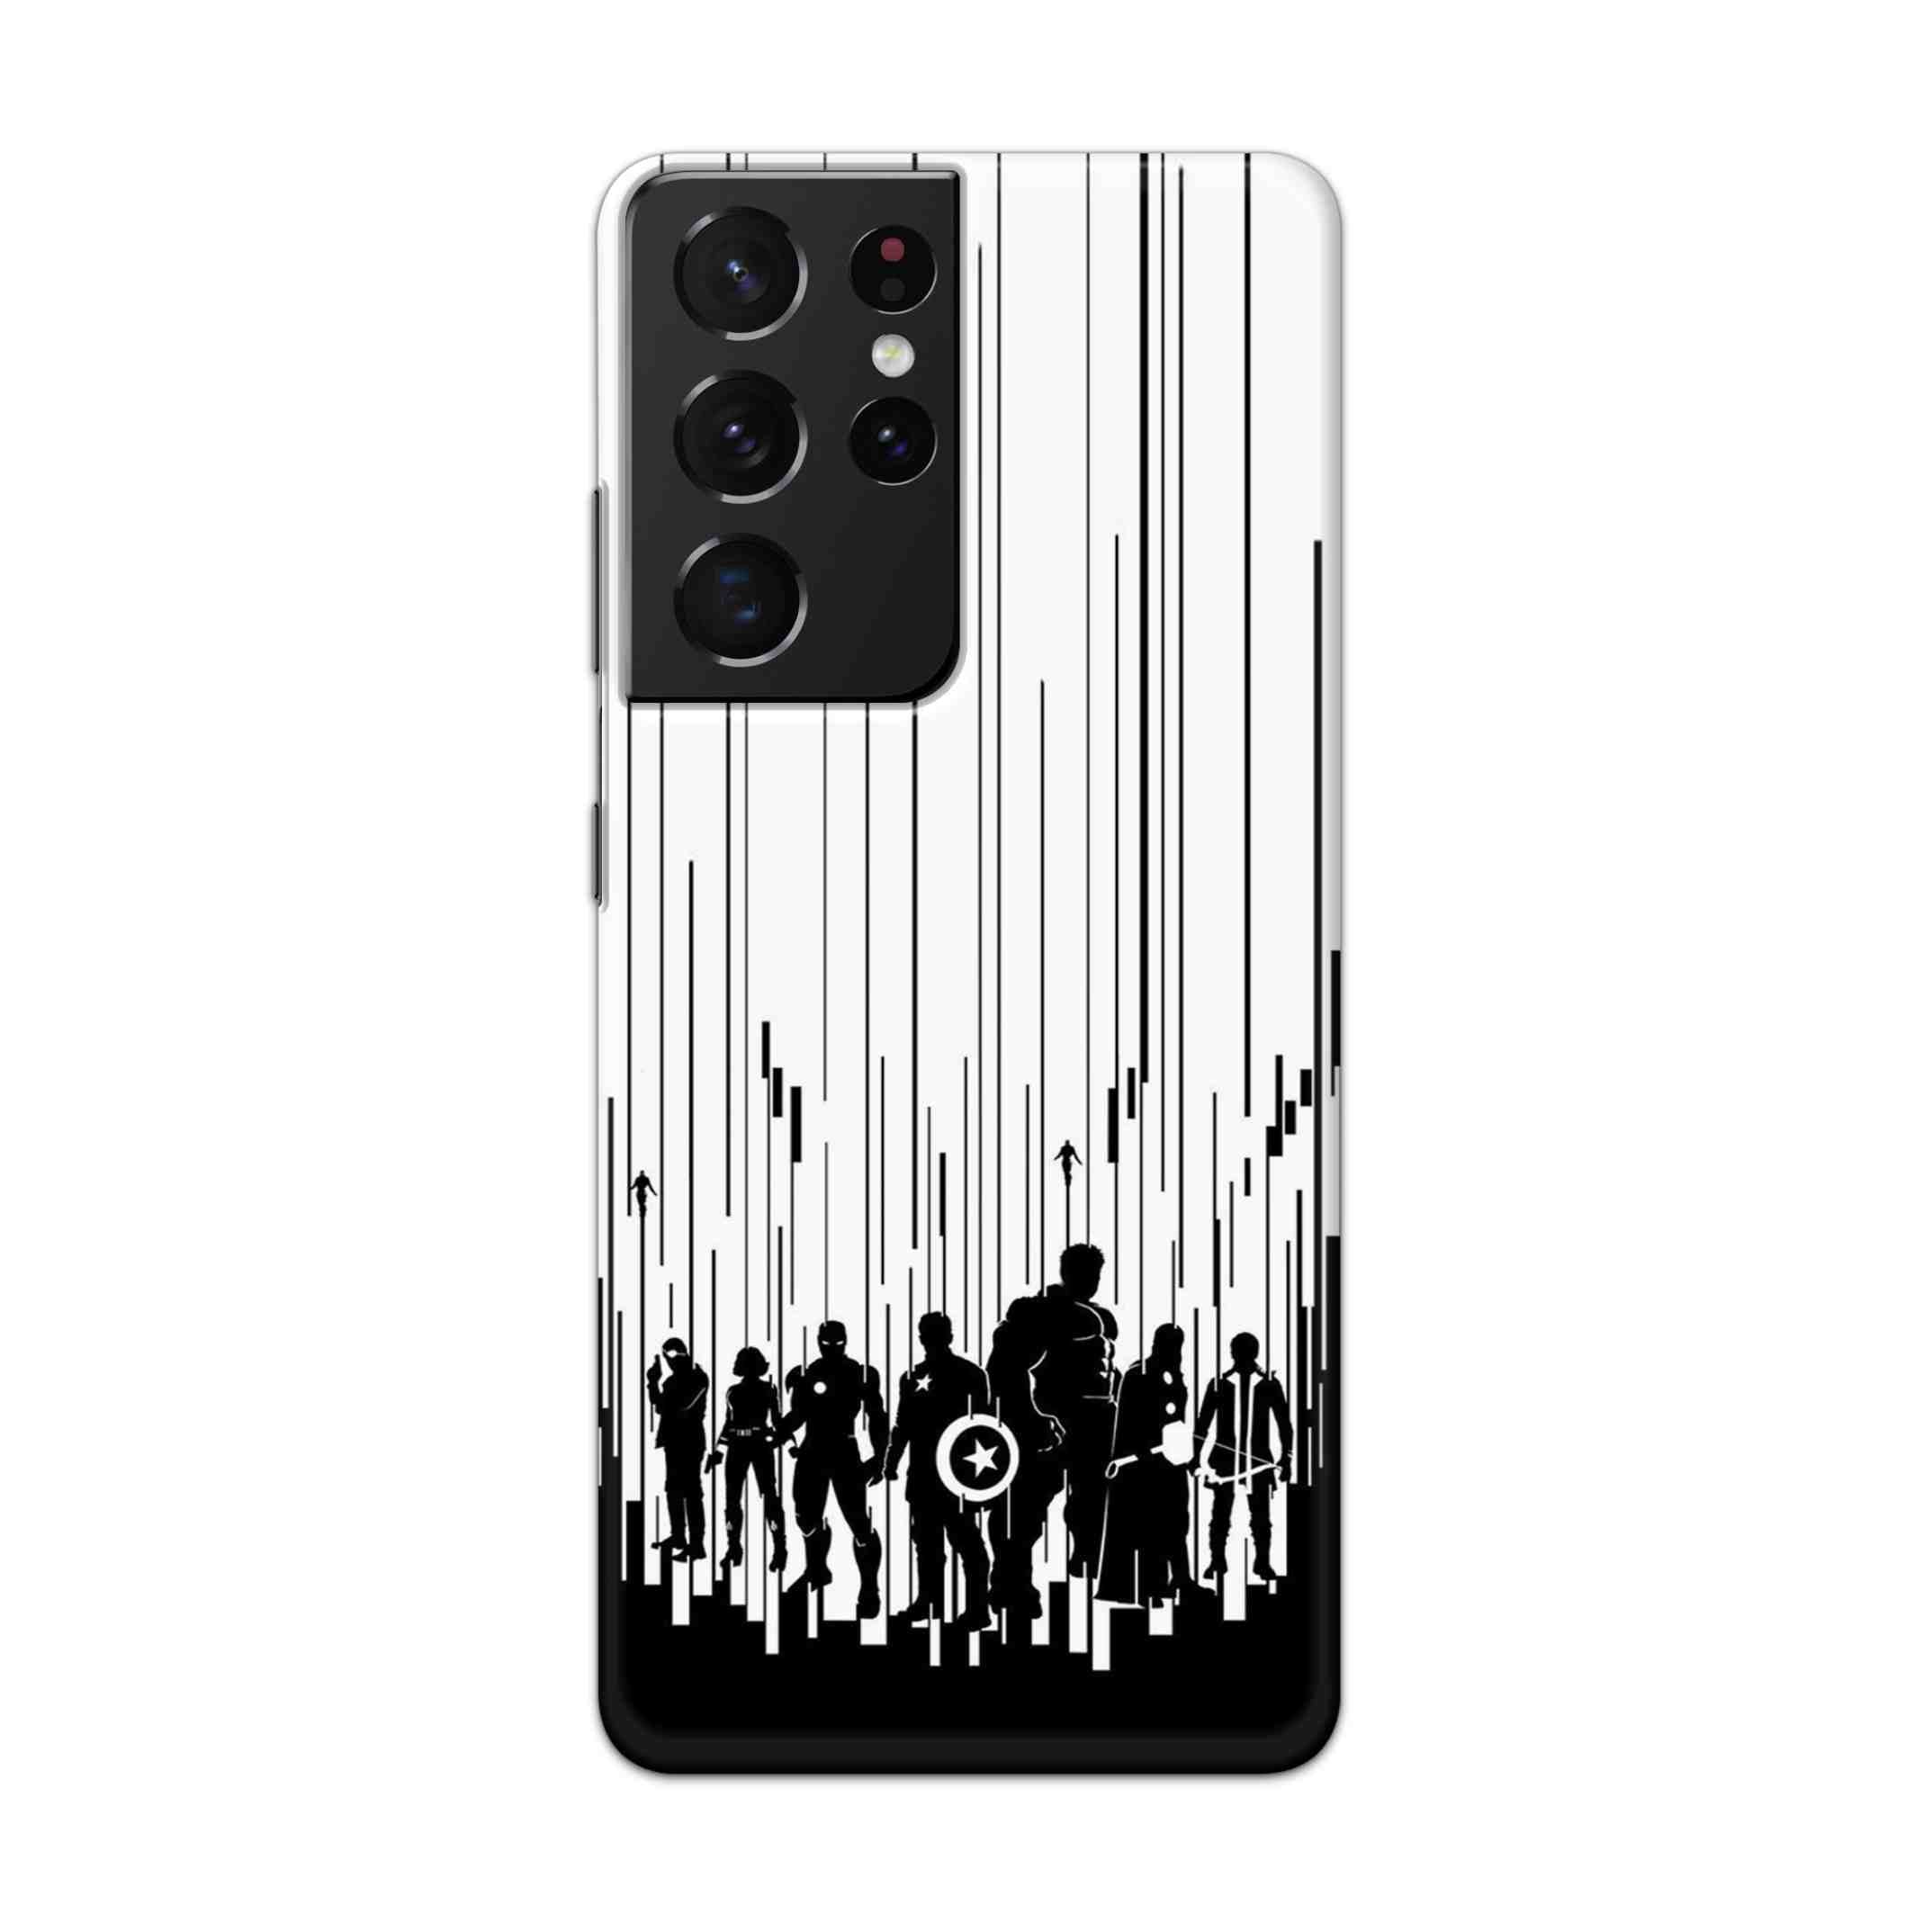 Buy Black And White Avengers Hard Back Mobile Phone Case Cover For Samsung Galaxy S21 Ultra Online